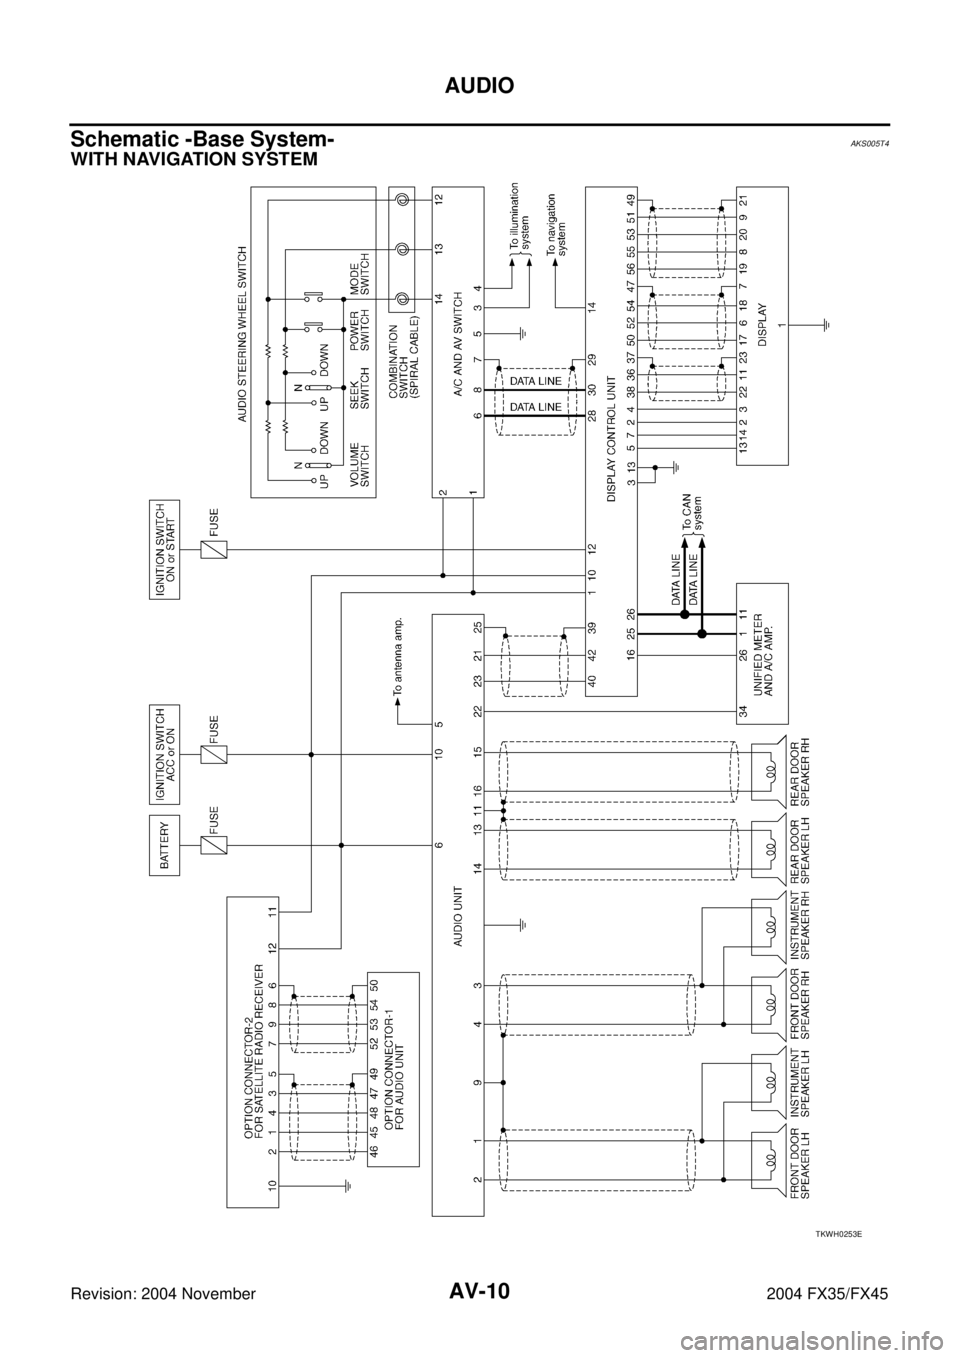 INFINITI FX35 2004  Service Manual AV-10
AUDIO
Revision: 2004 November 2004 FX35/FX45
Schematic -Base System-AKS005T4
WITH NAVIGATION SYSTEM
TKWH0253E 